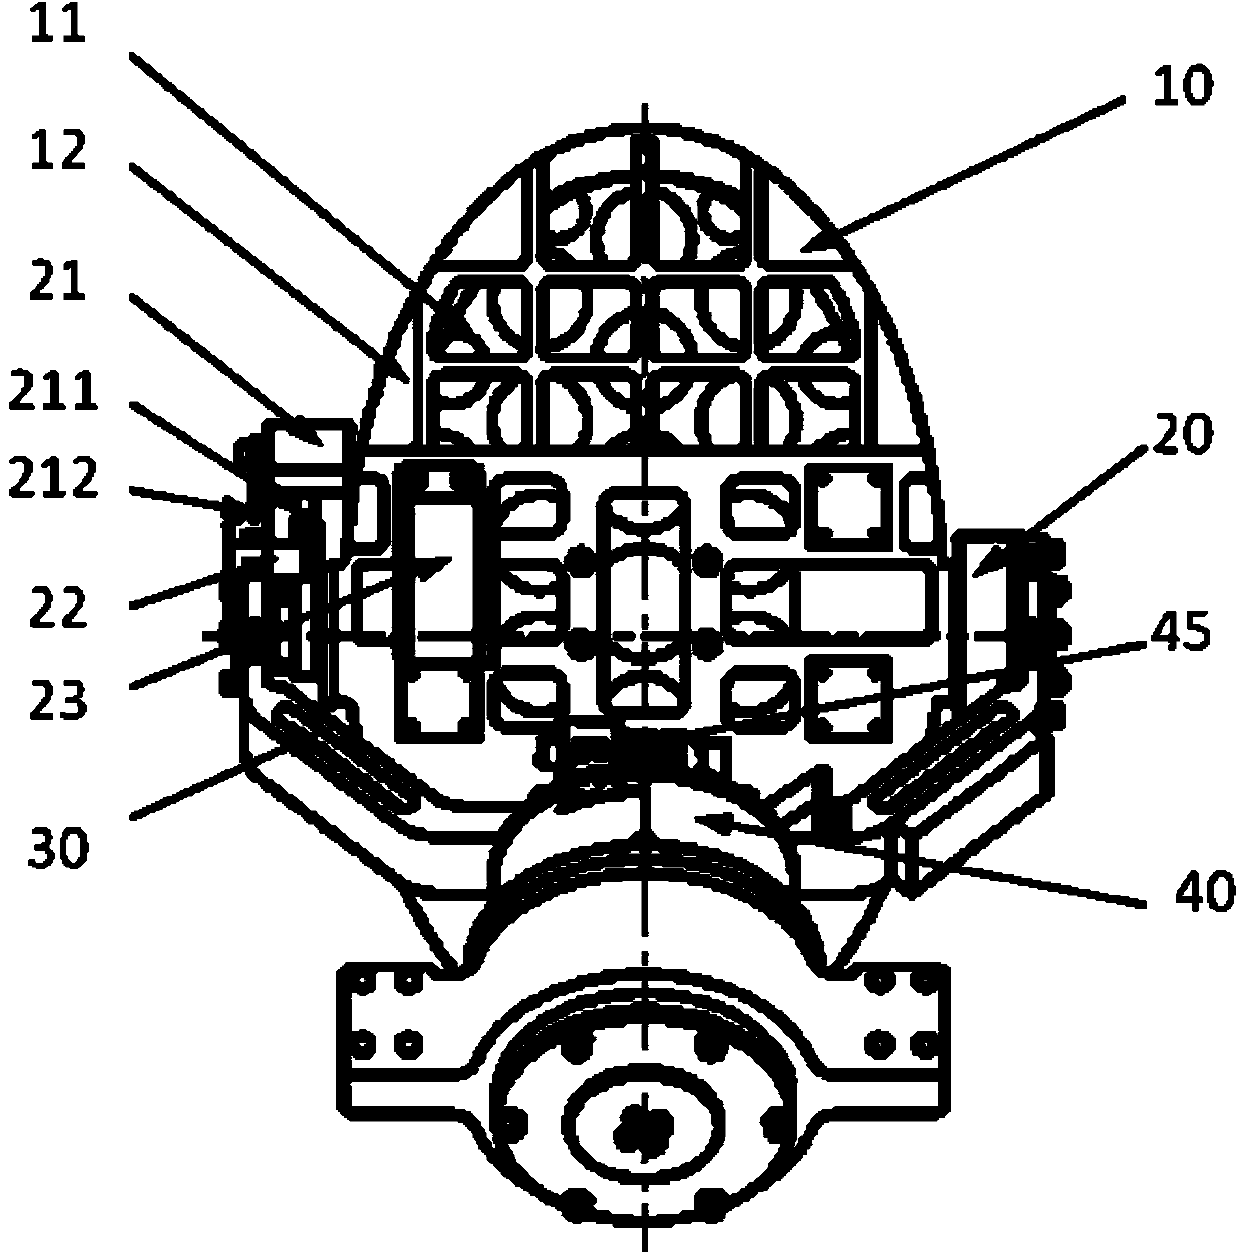 Scanning mechanism applied to aerial camera